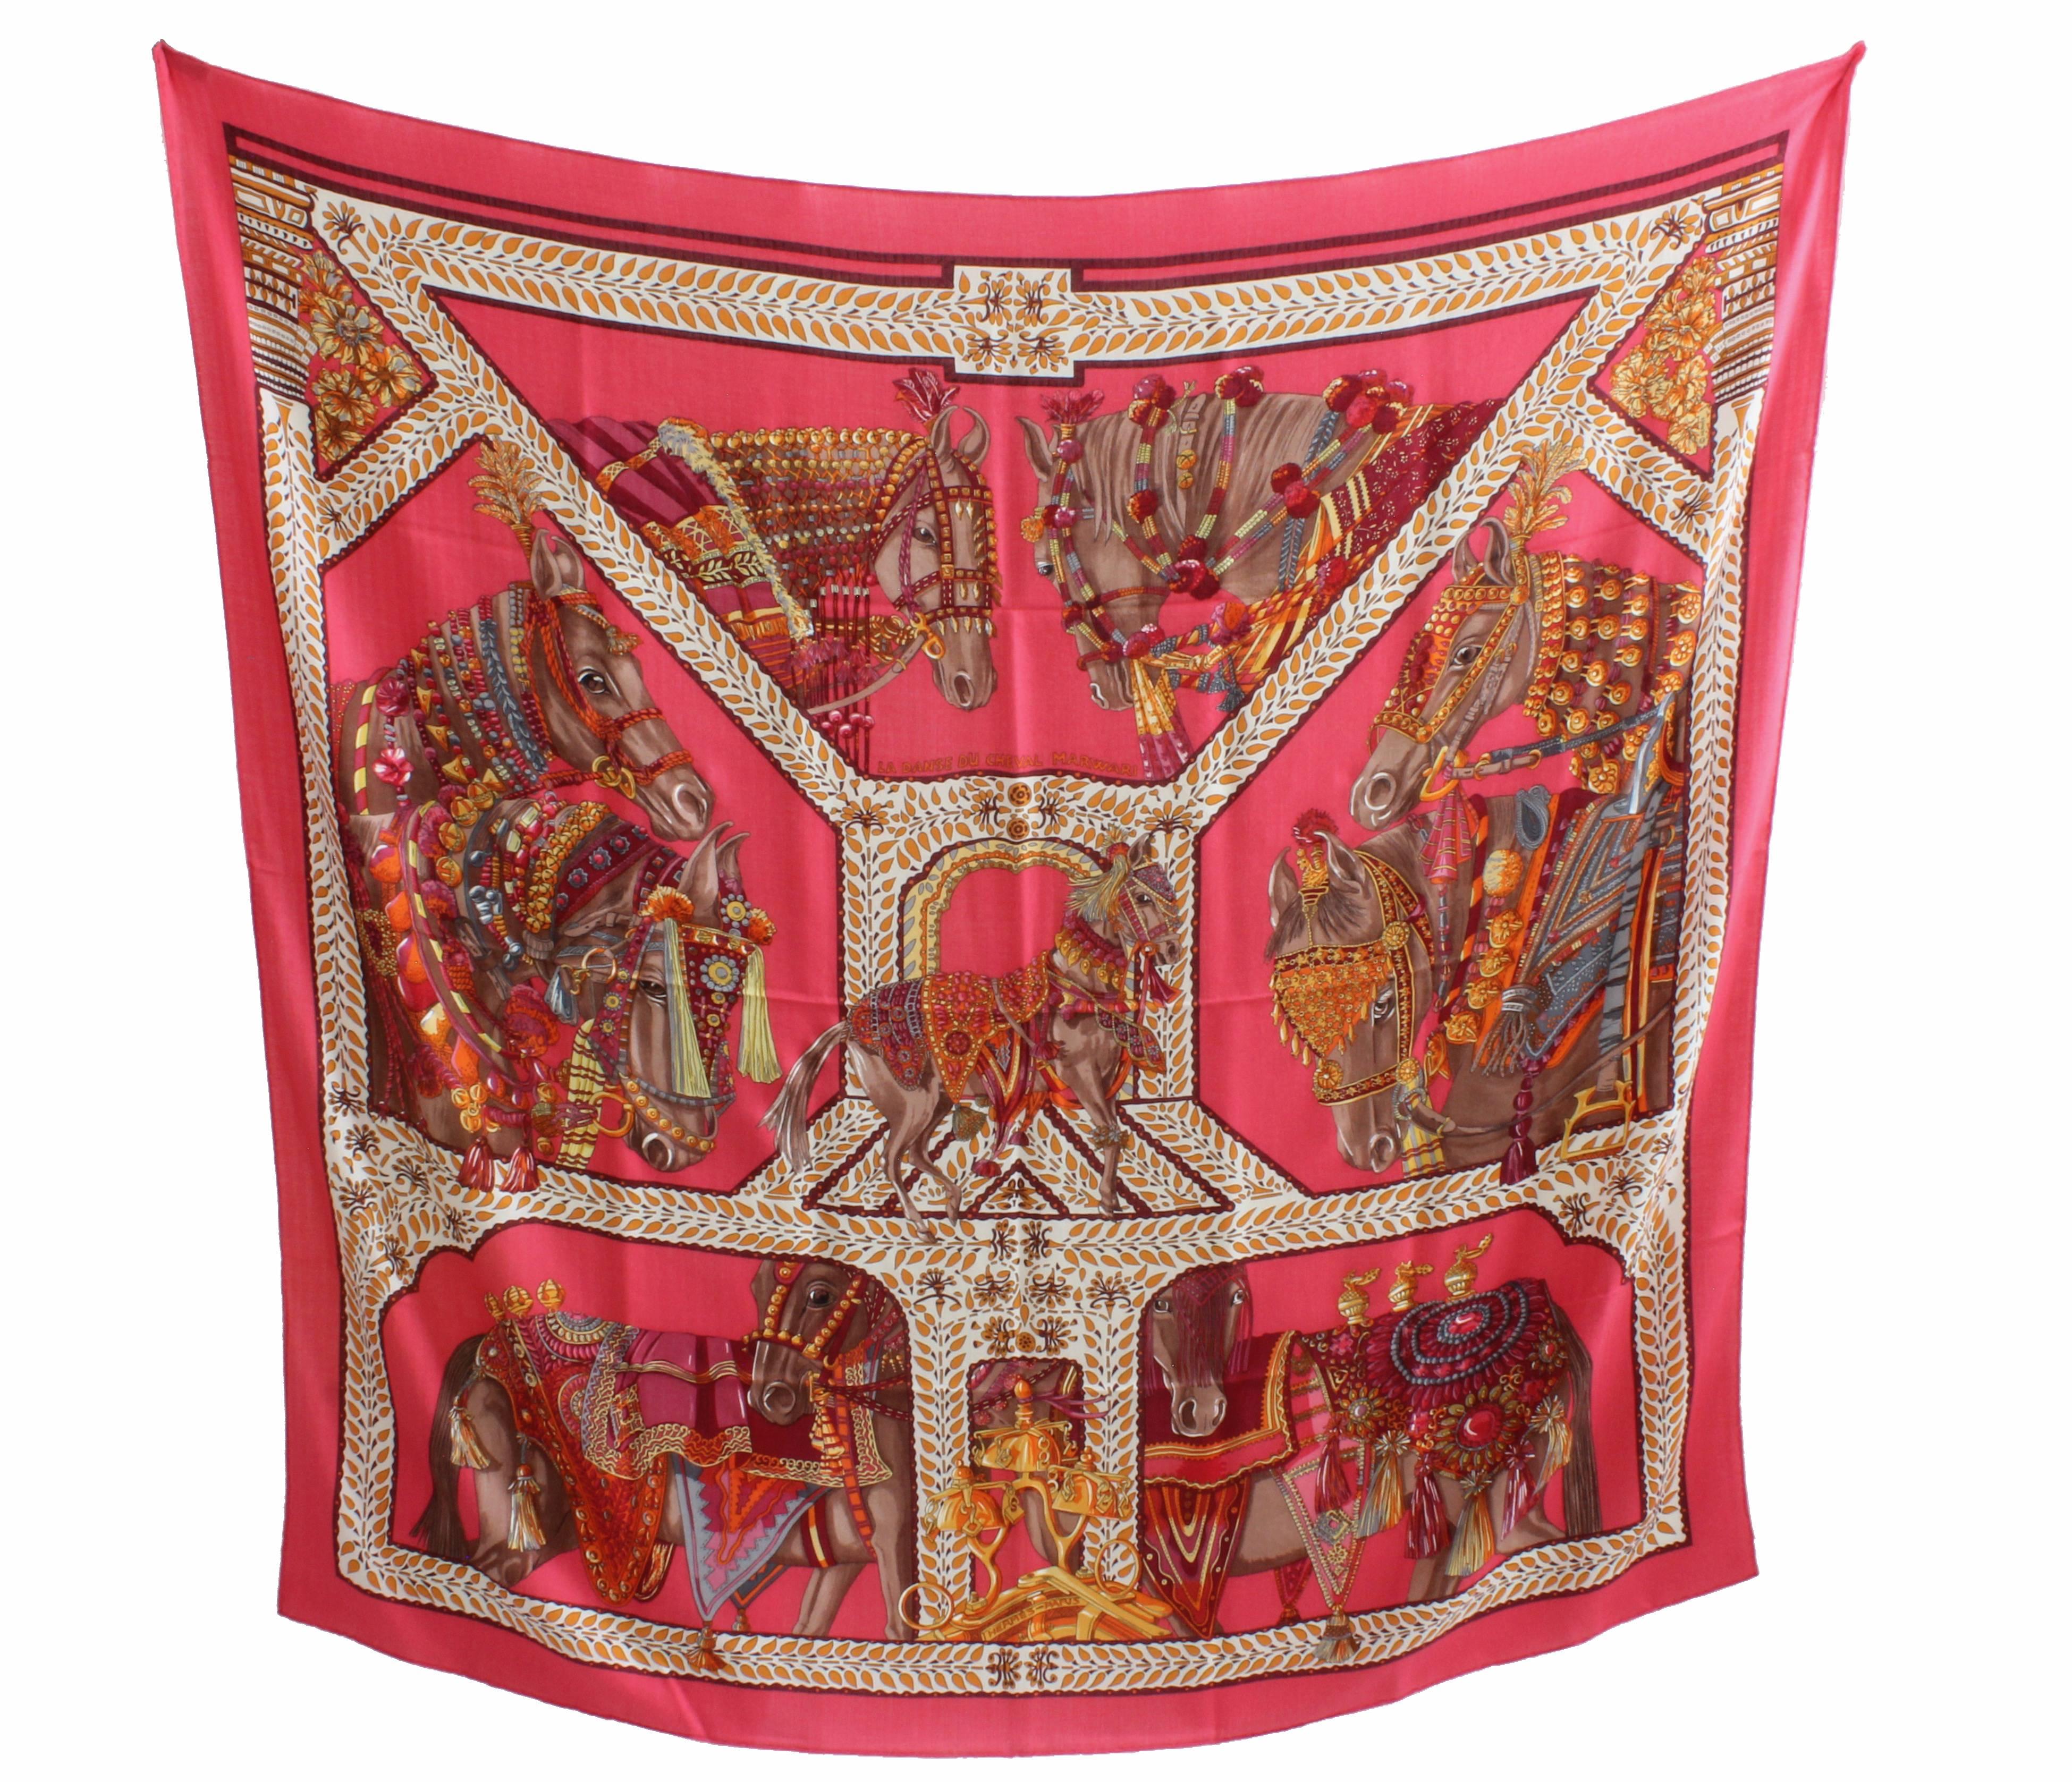 This is one of our favorite Hermes La Maison Des Carres prints from designer Annie Faivre - and in a gorgeous color way of Rose VIF, orange and fuchsia. La Danse du Cheval Marwari was released as a 140cm (55 inch) cashmere and silk shawl in 2008 and